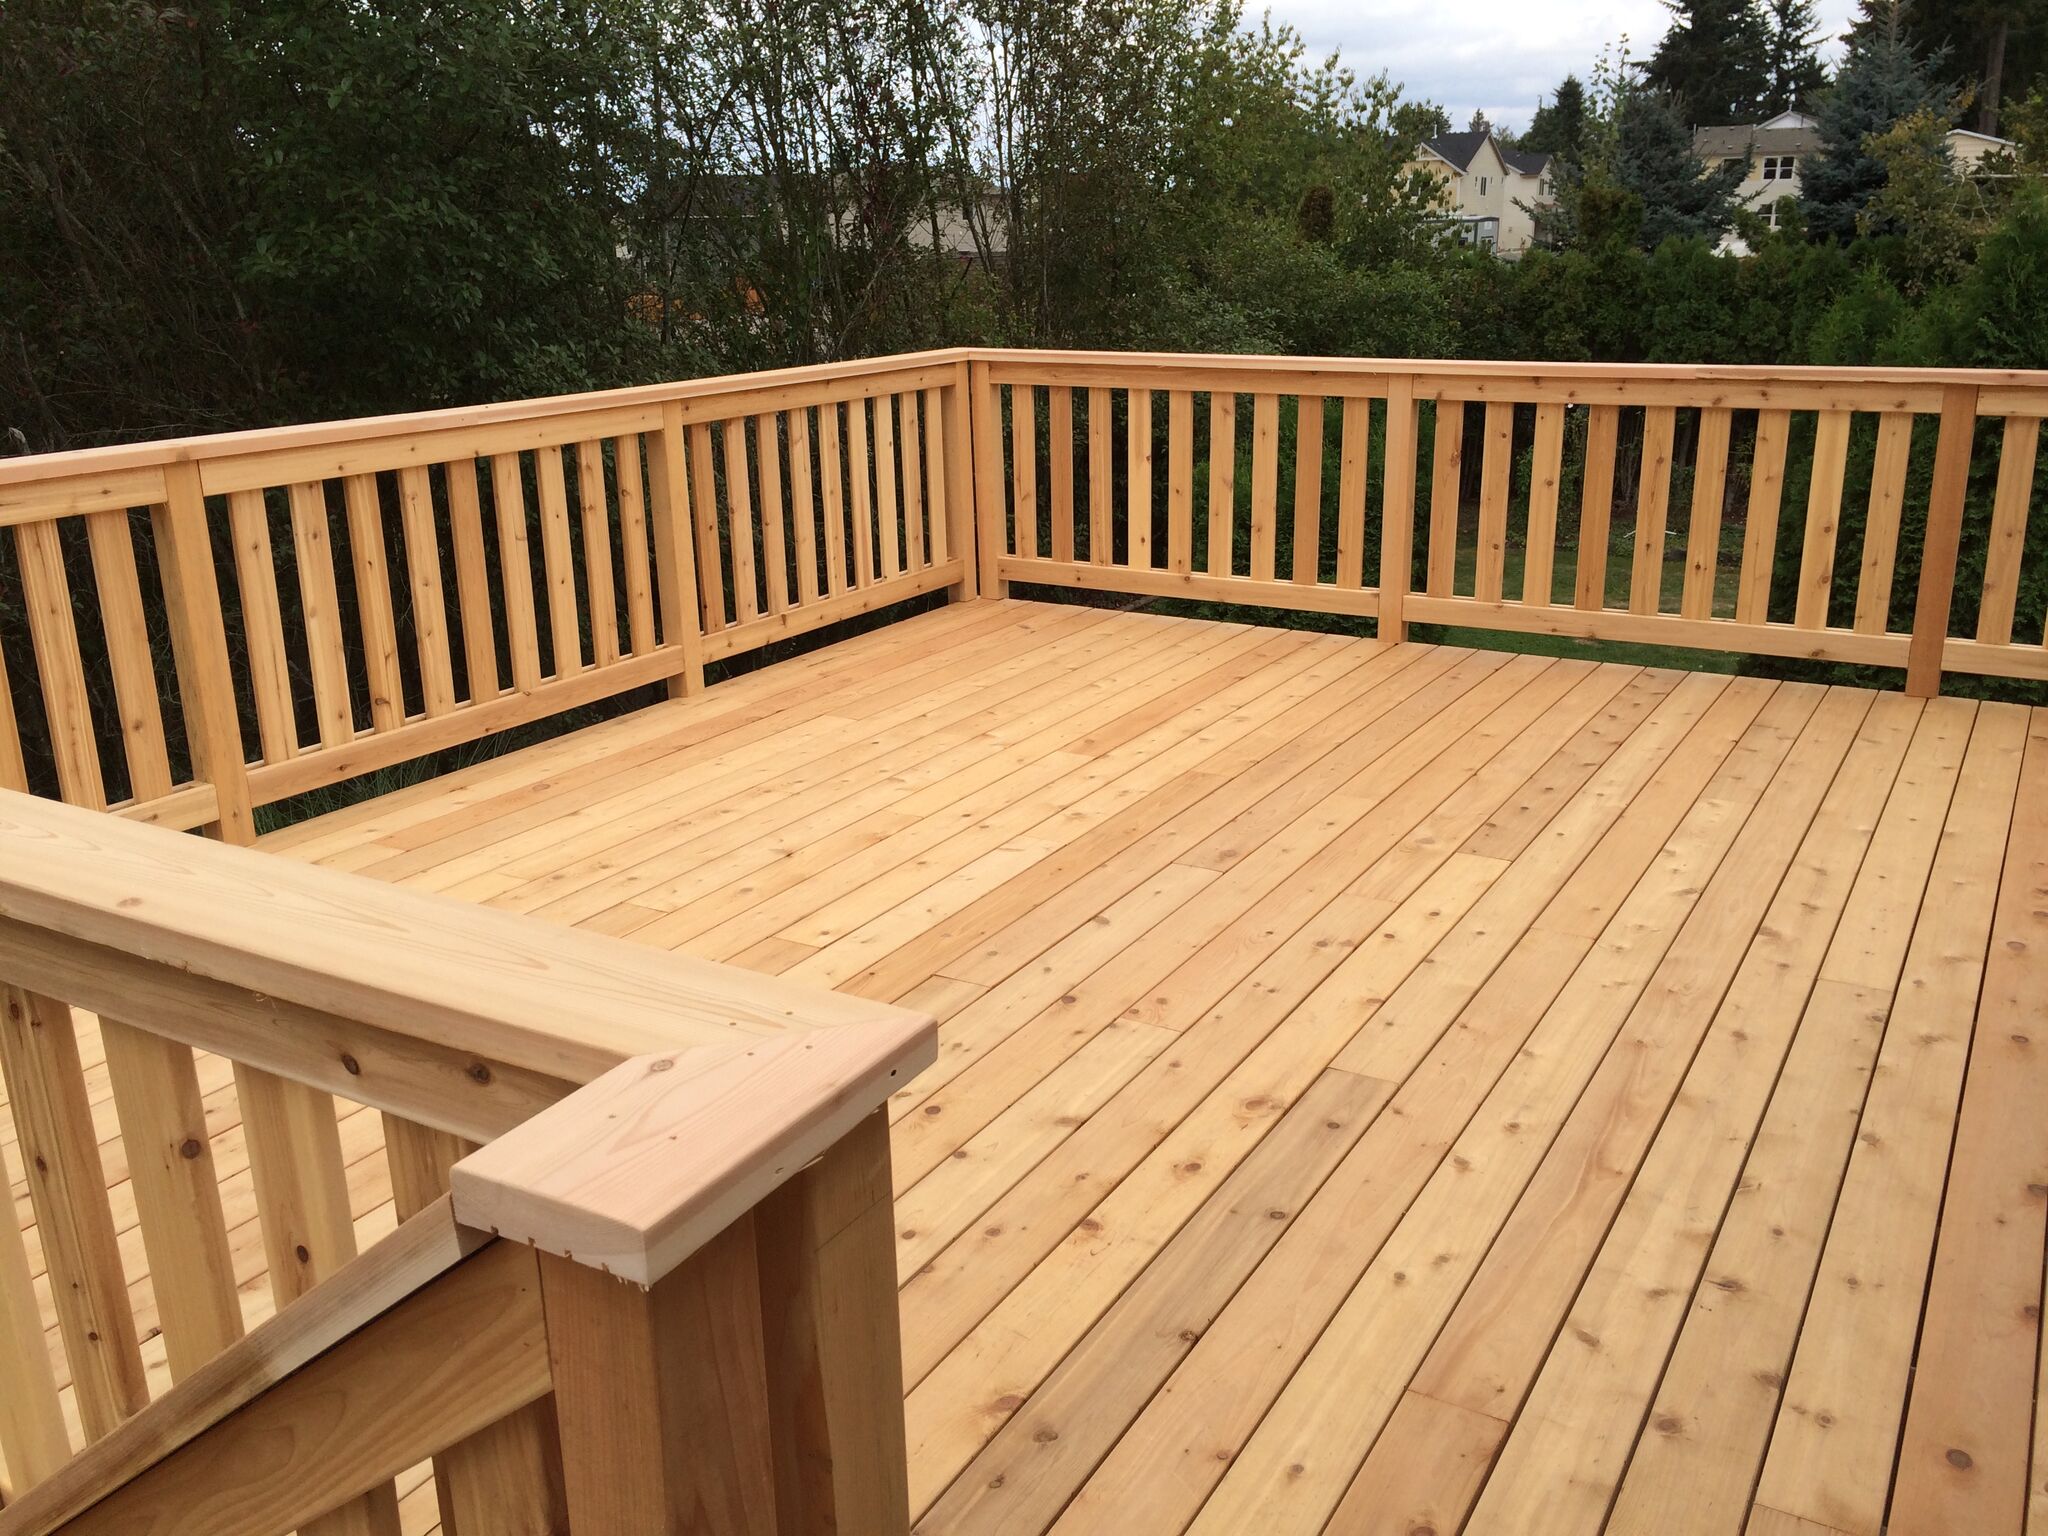 Deck Inspection to Ensure a Safe Deck - Dream Home Consultants, LLC.